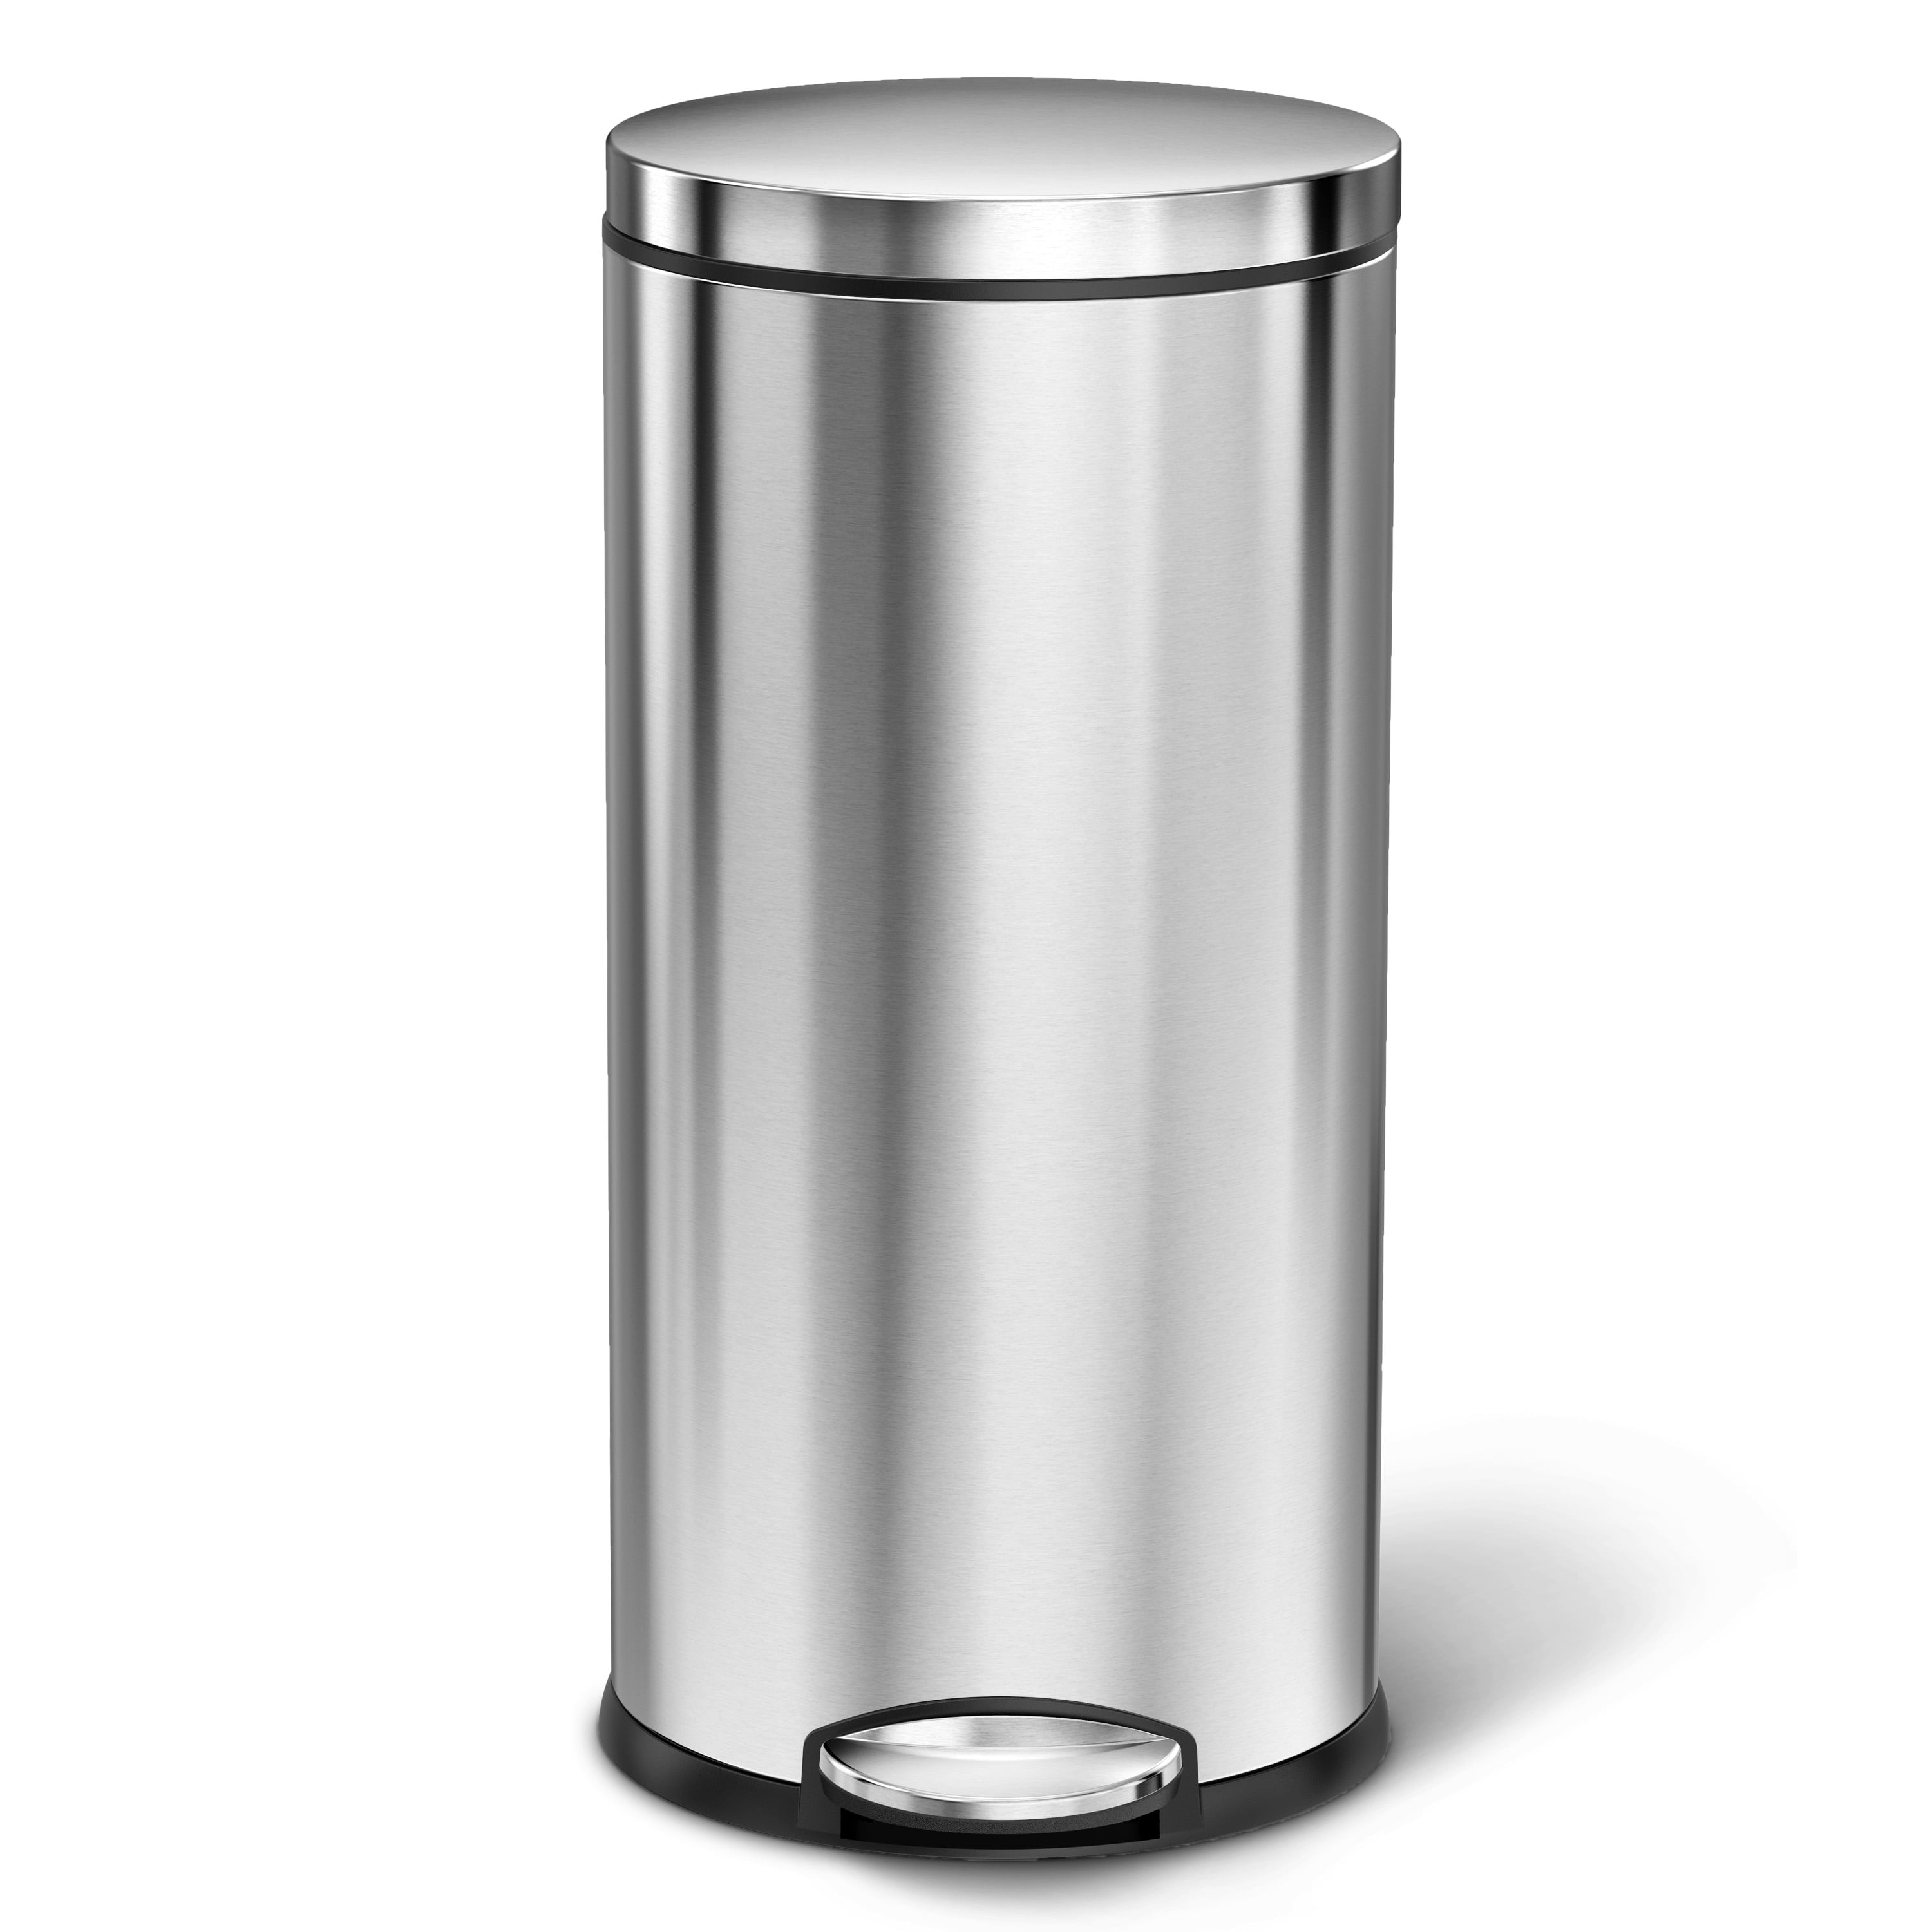 *NEW* Stainless Steel 35 Gallon Restaurant Round Trash Can Cylinder 